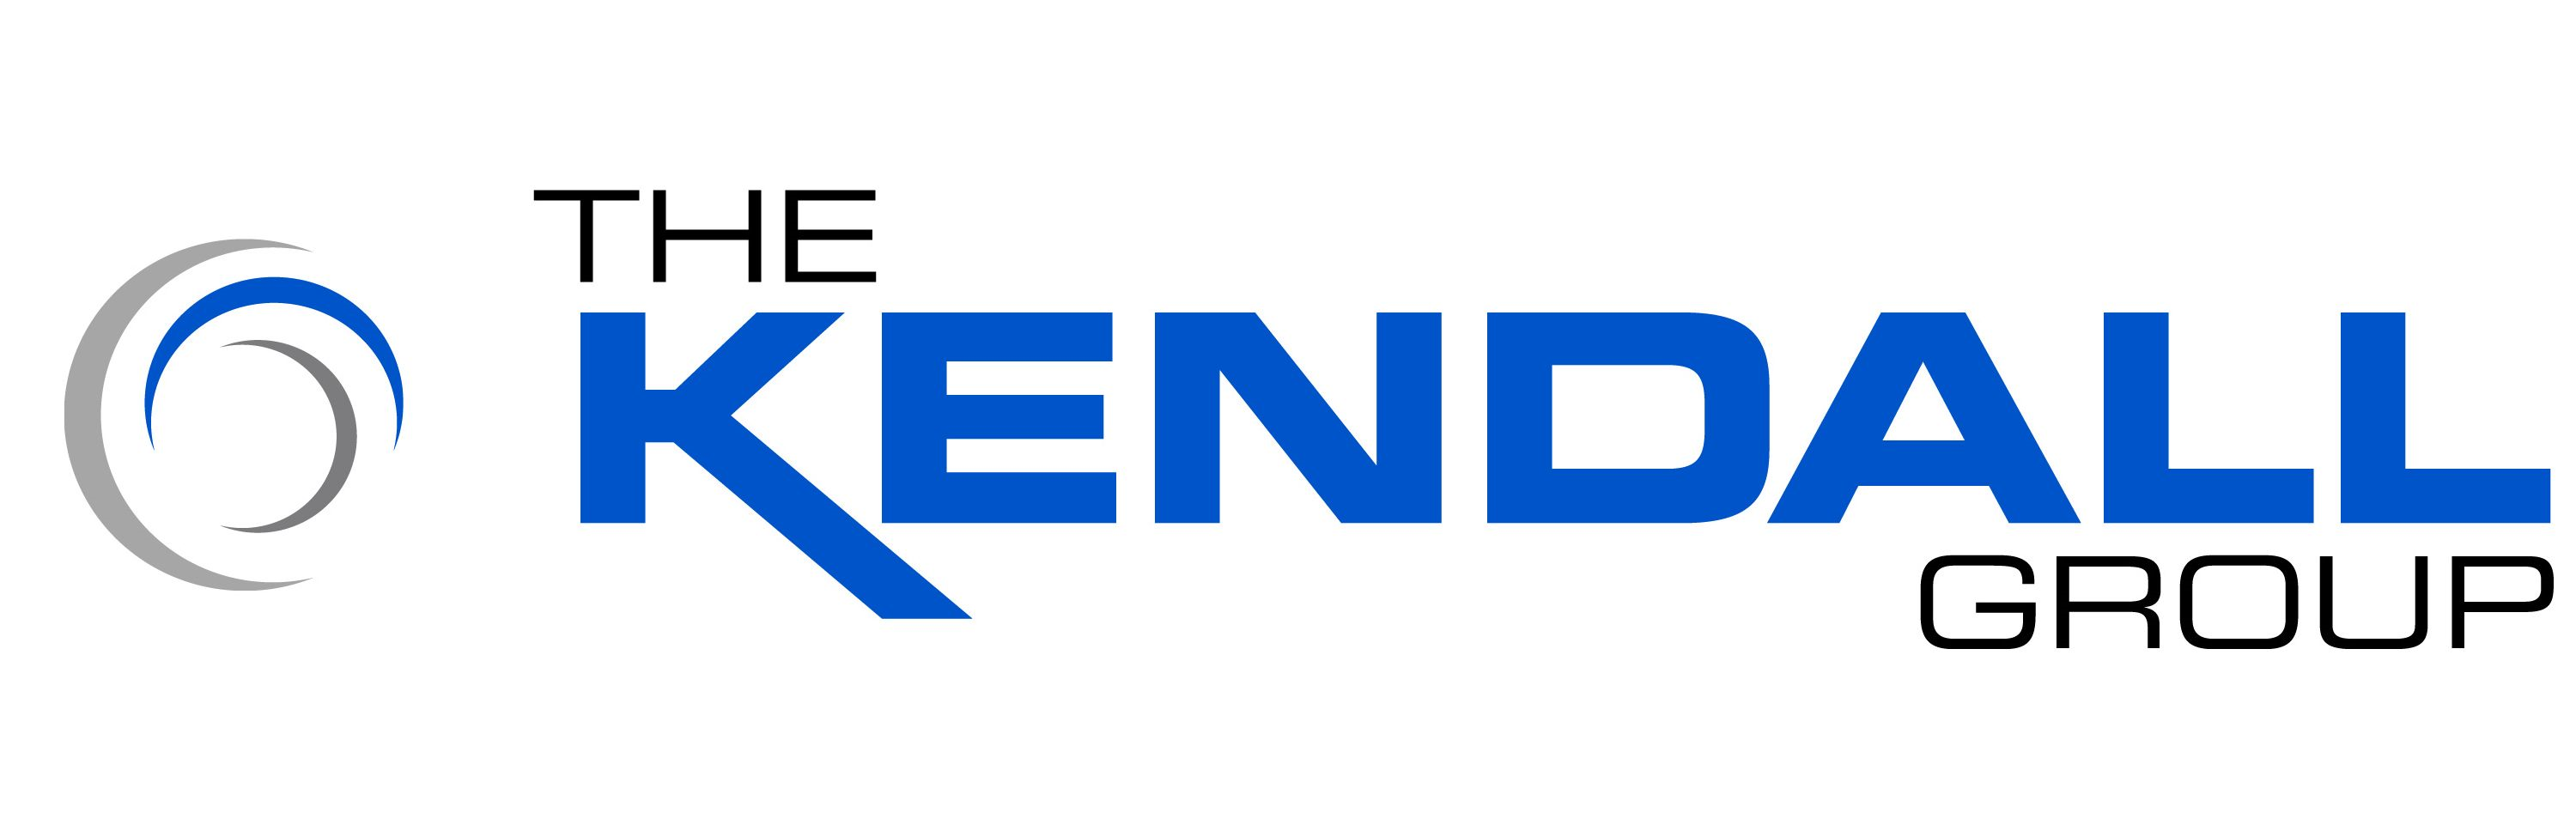 The Kendall Group logo